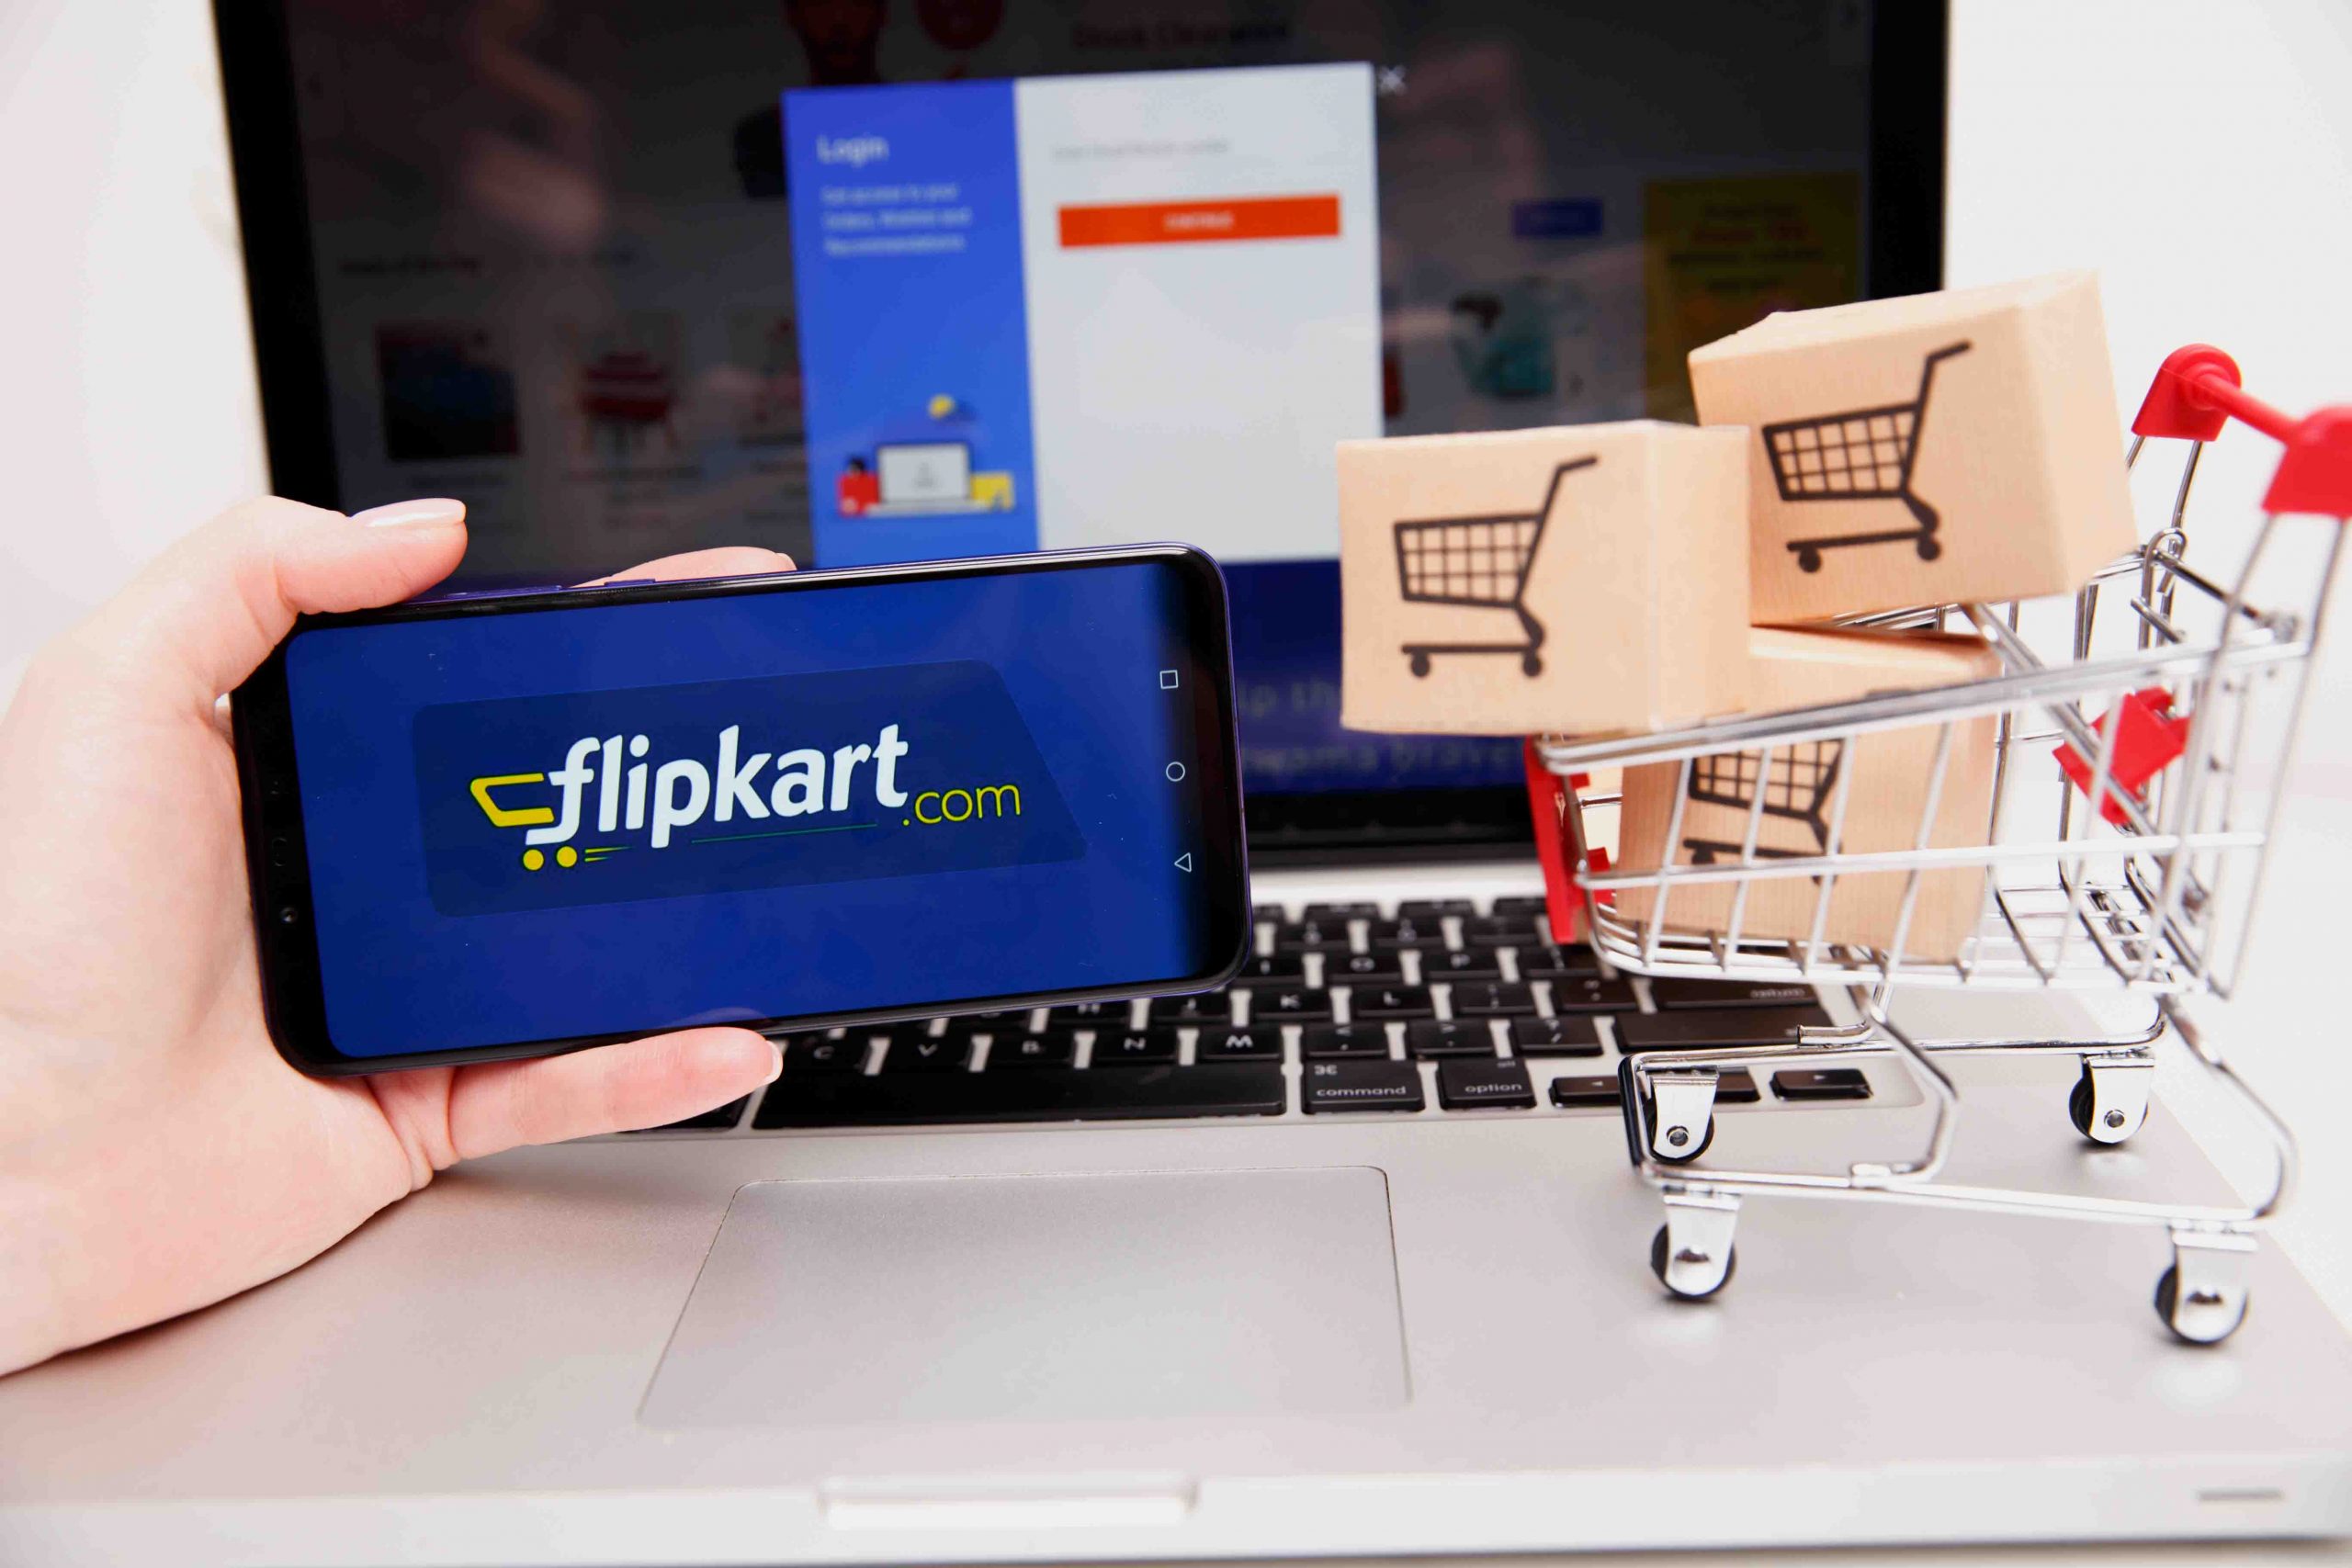 Flipkart Launches Accelerator Program to Back Early-stage Startups